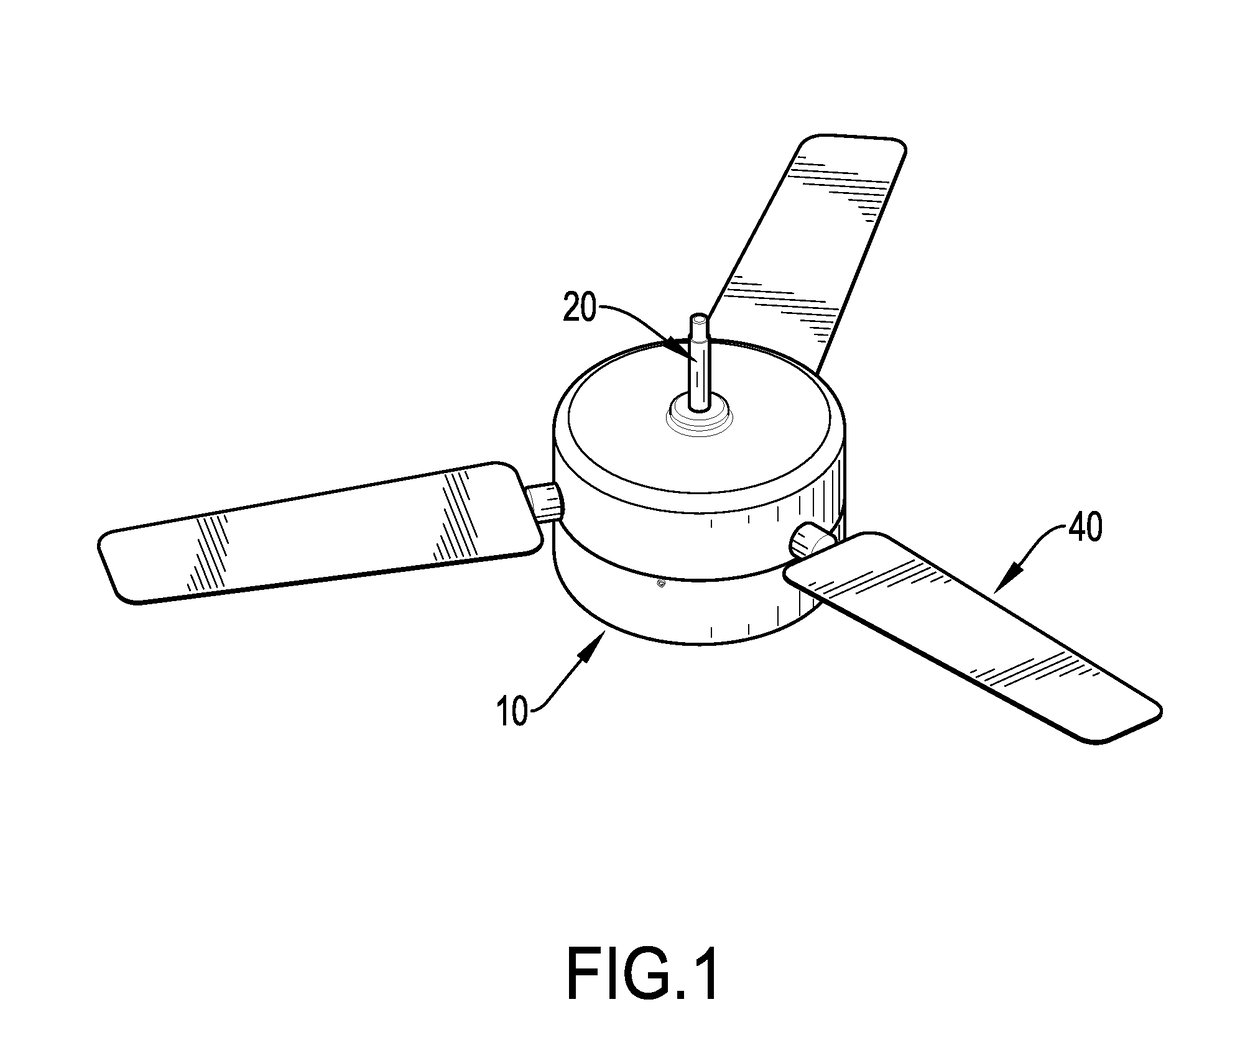 Ceiling fan capable of adjusting angles of fan blades